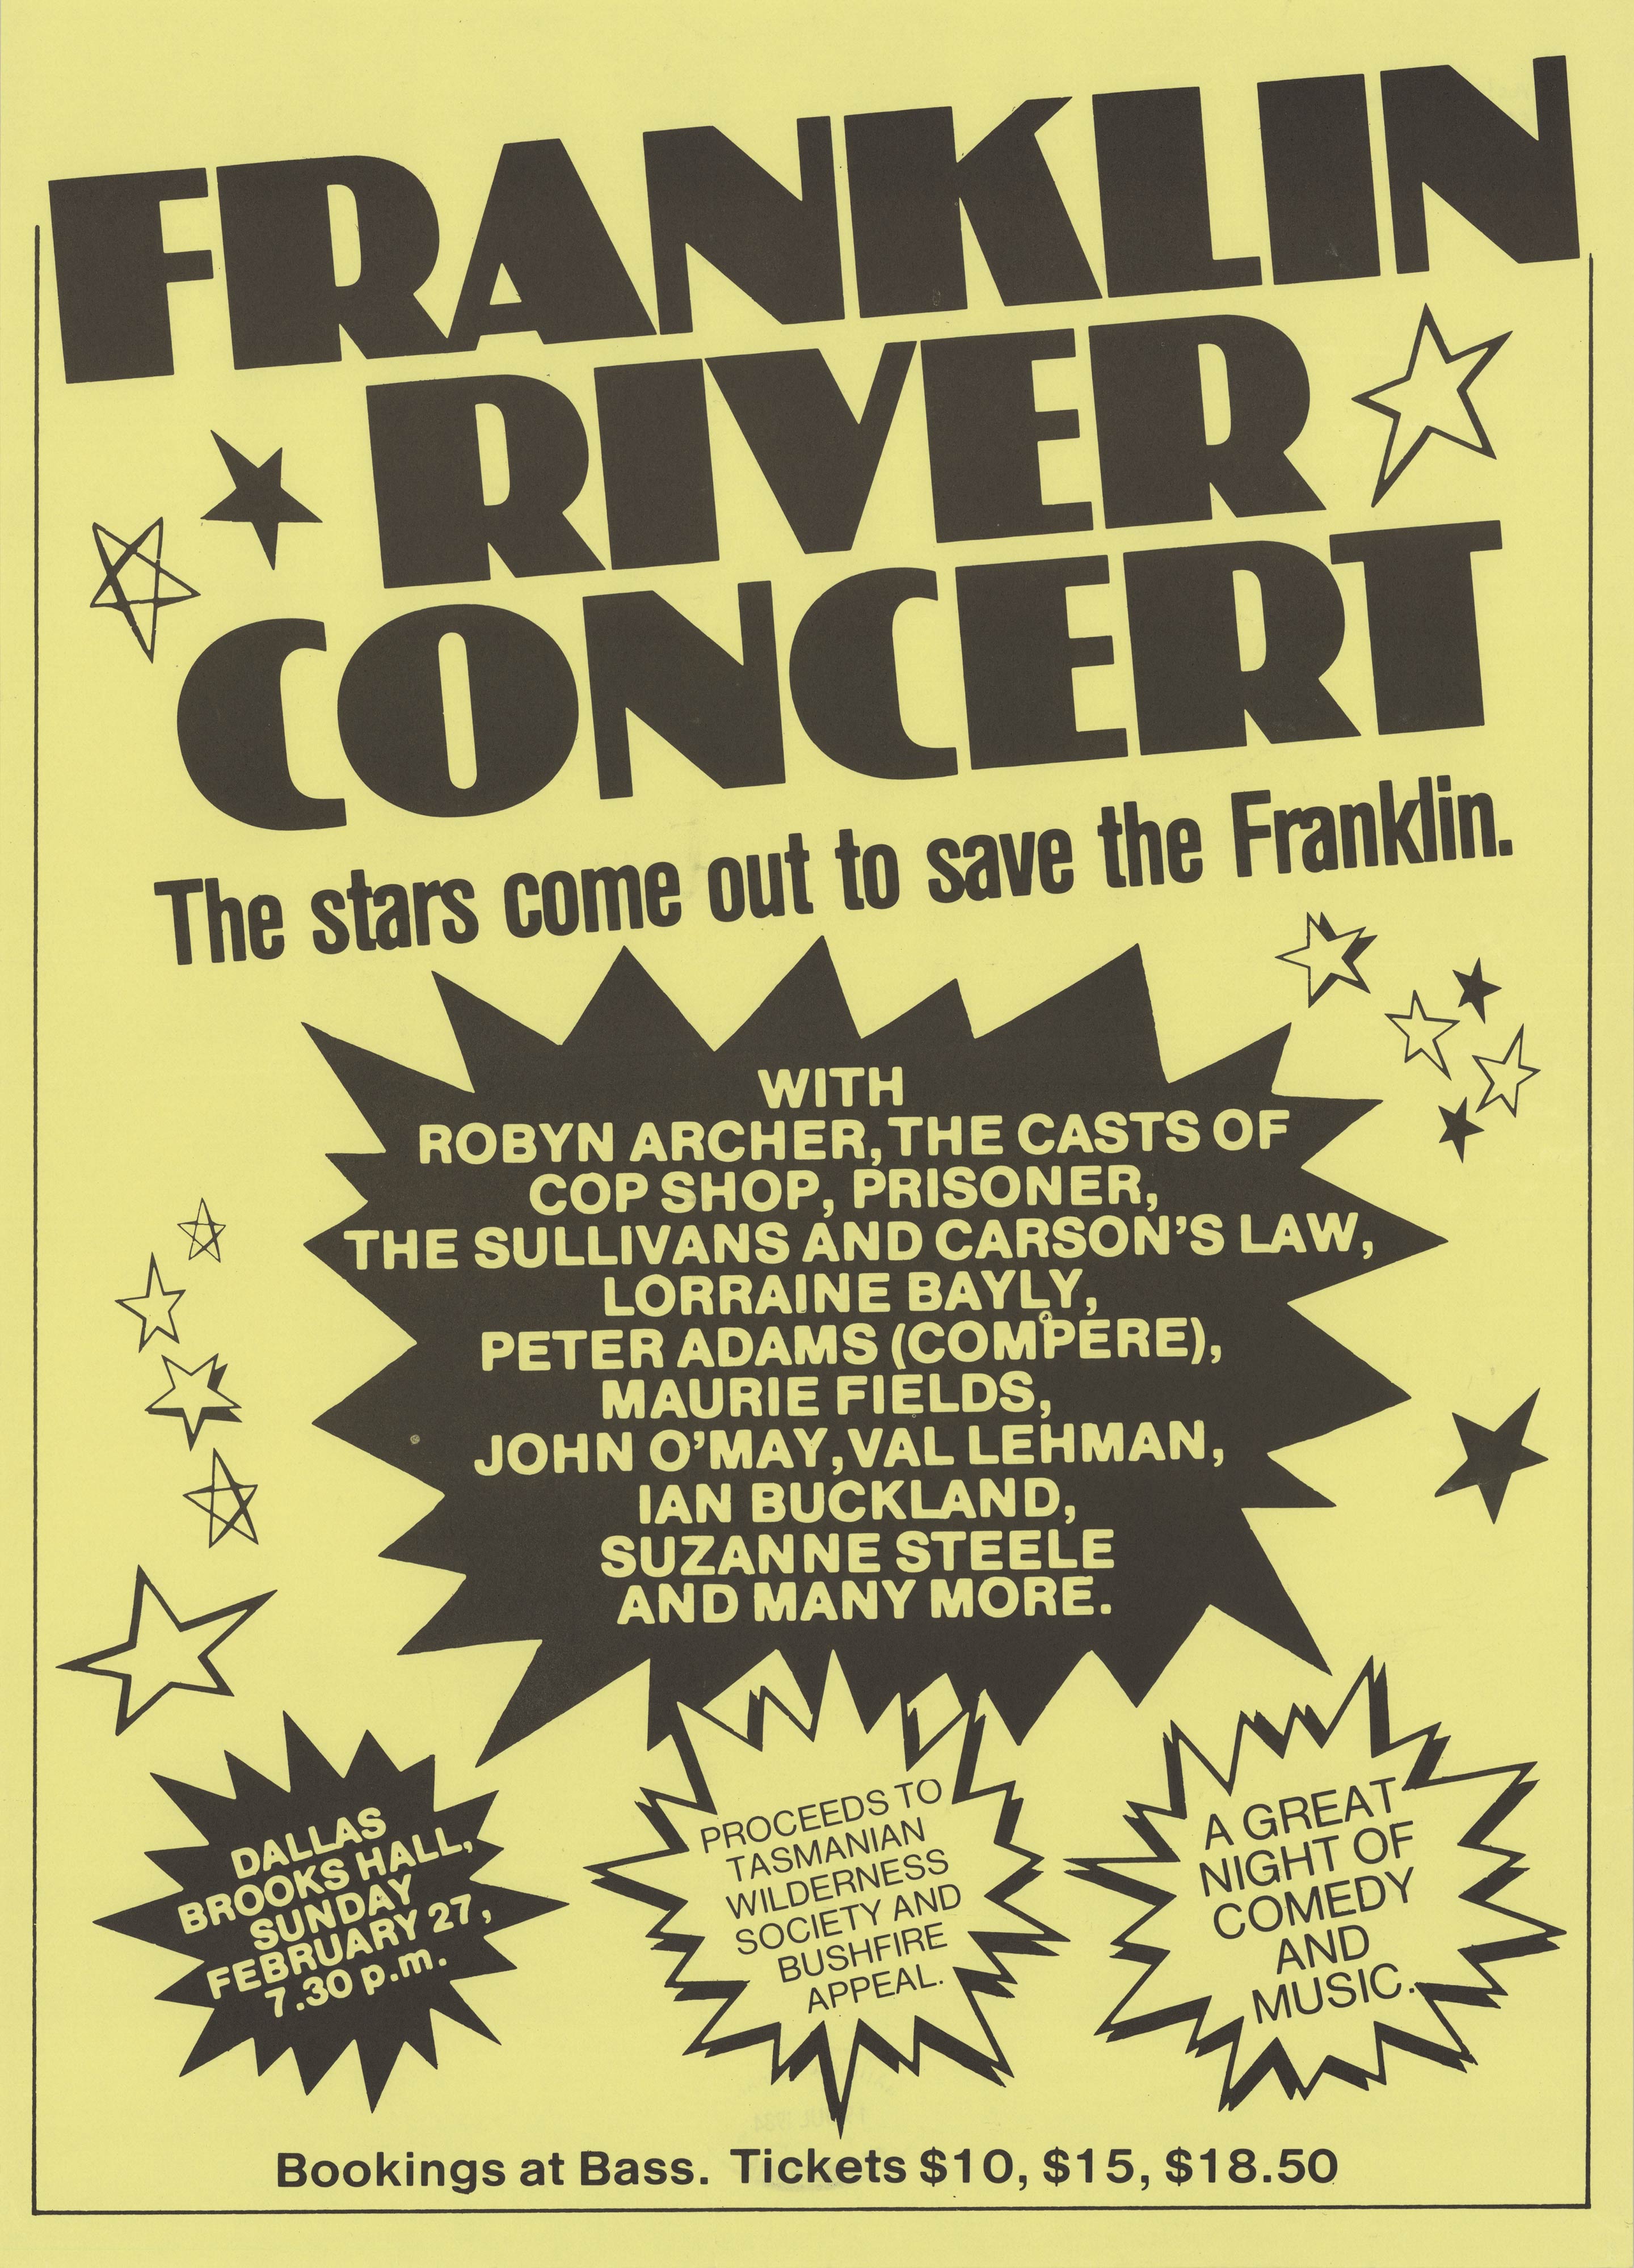 Poster advertising a concert to support the conservation of the Franklin River, 1983